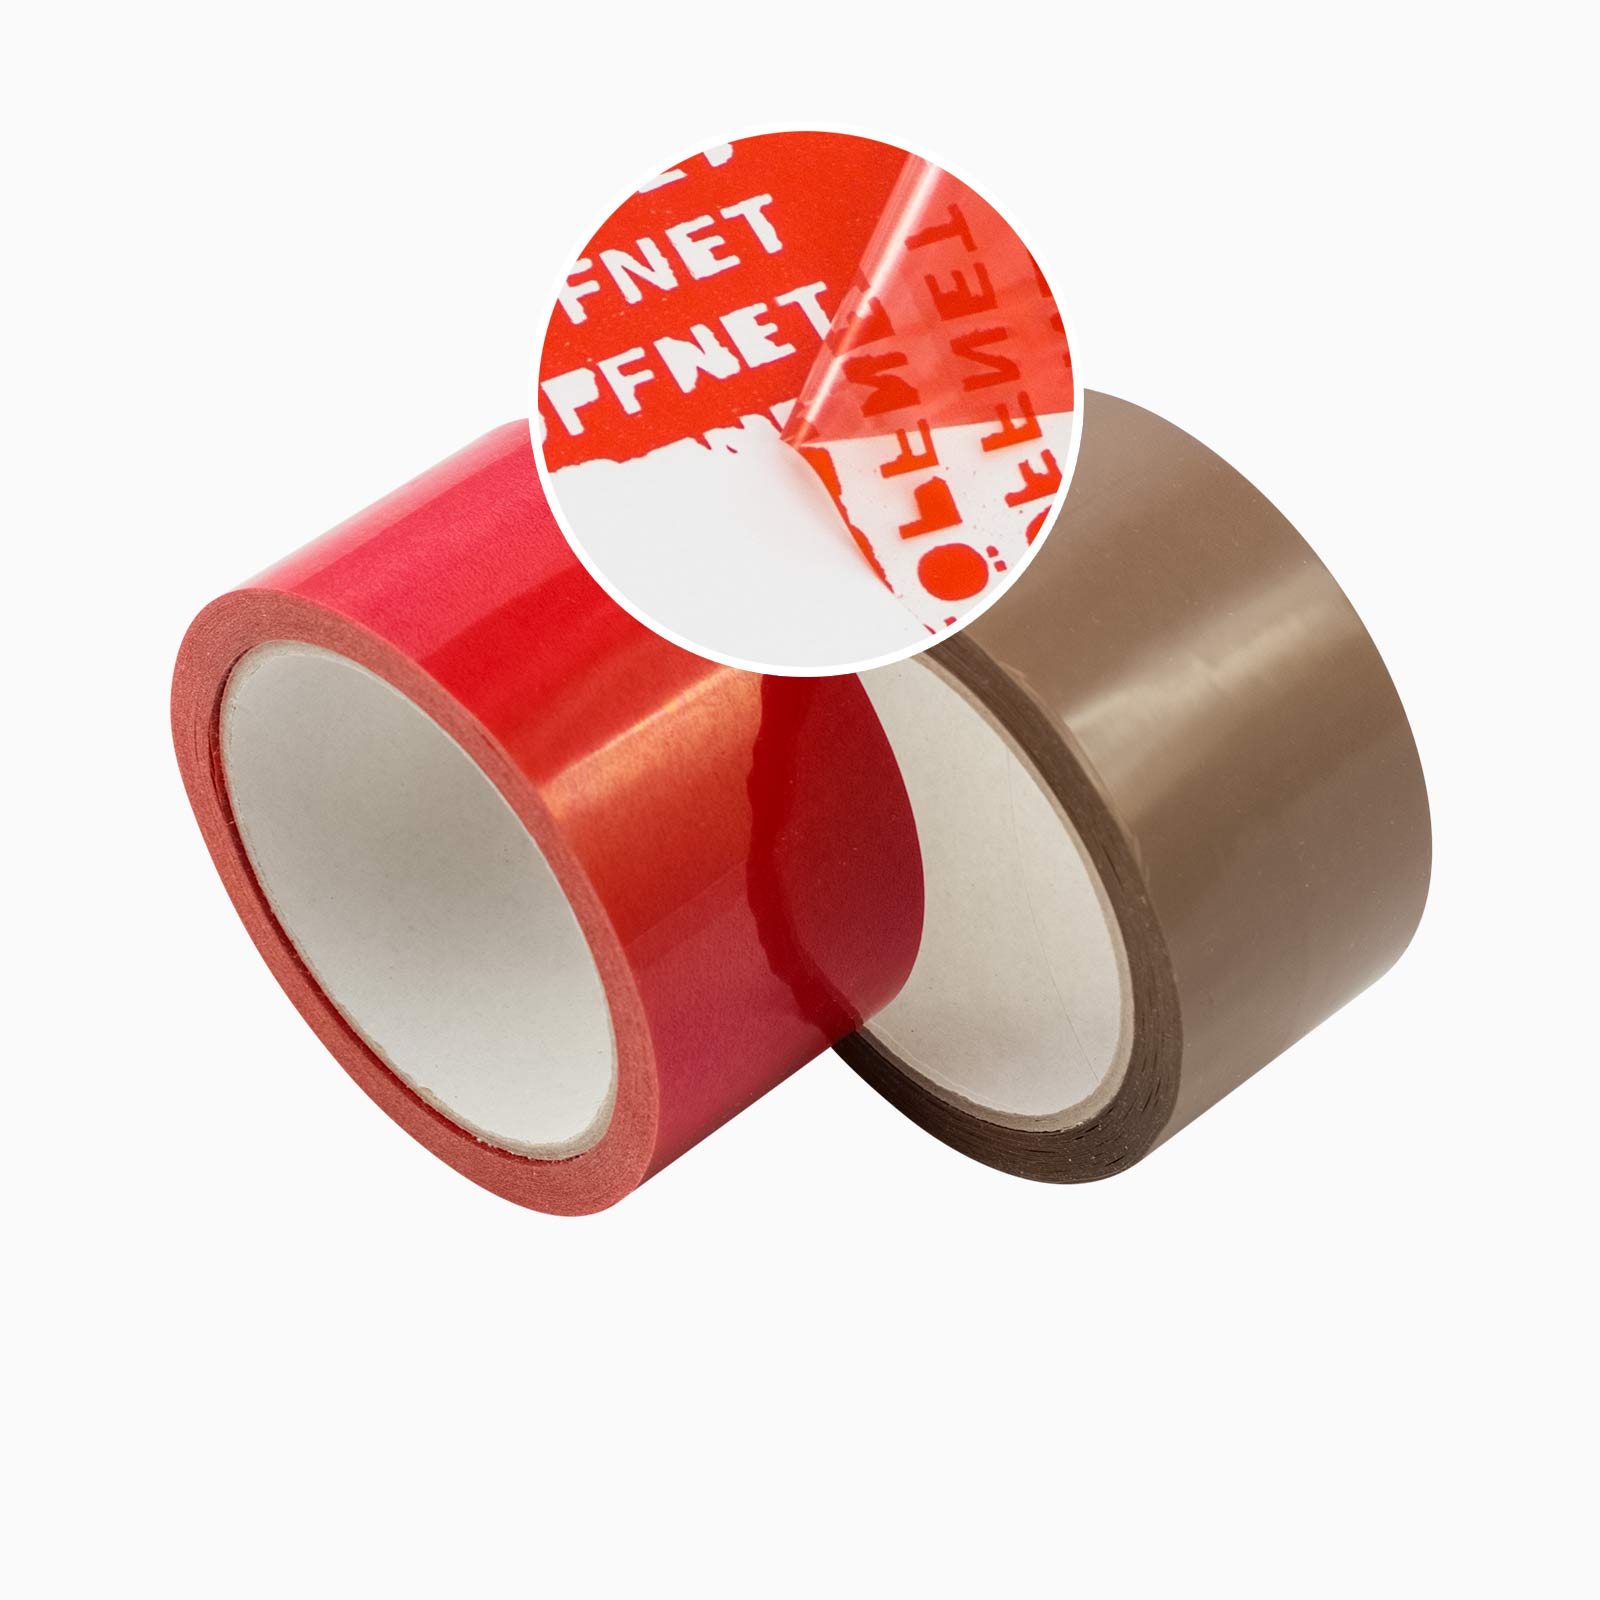 Security adhesive tape